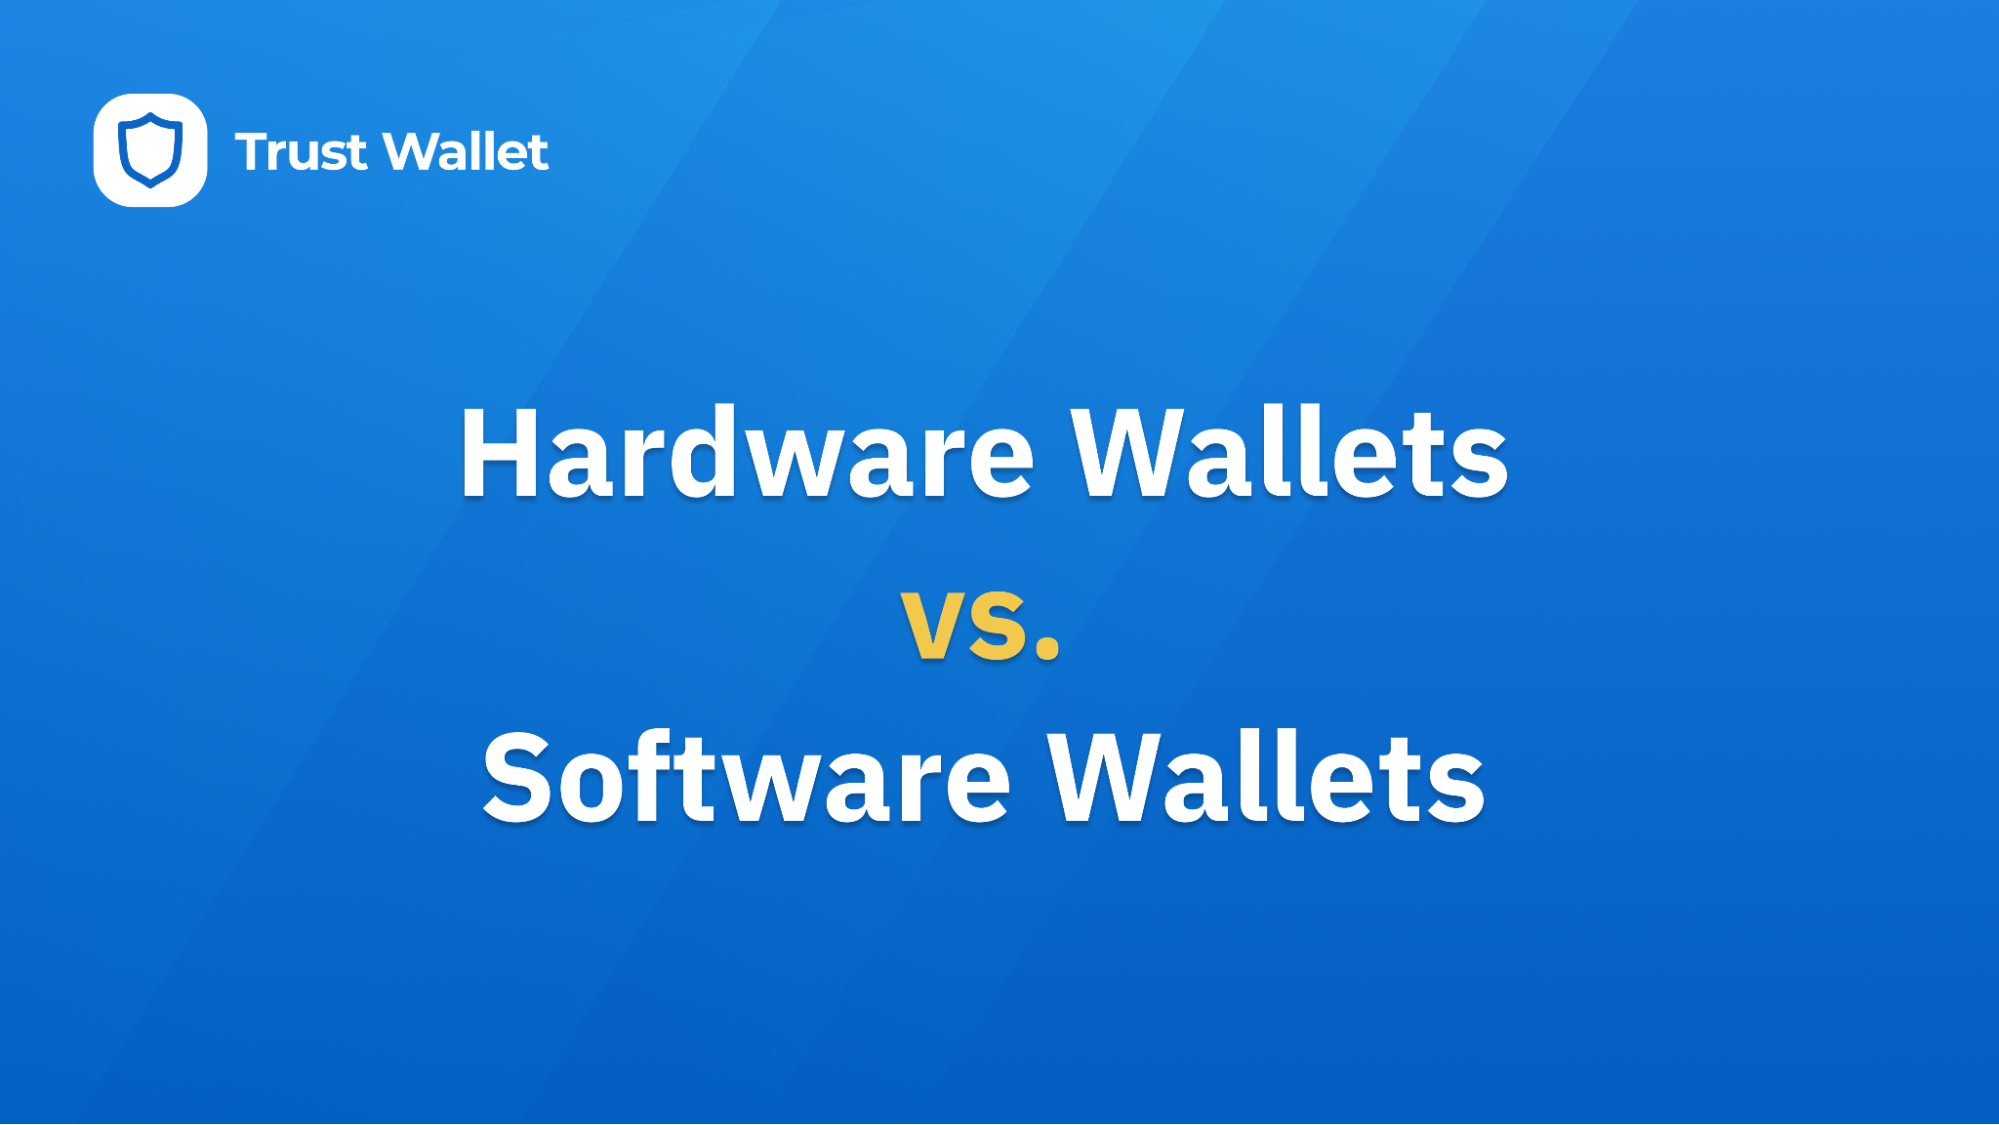 Hardware Wallets vs. Software Wallets: What’s the Real Difference?